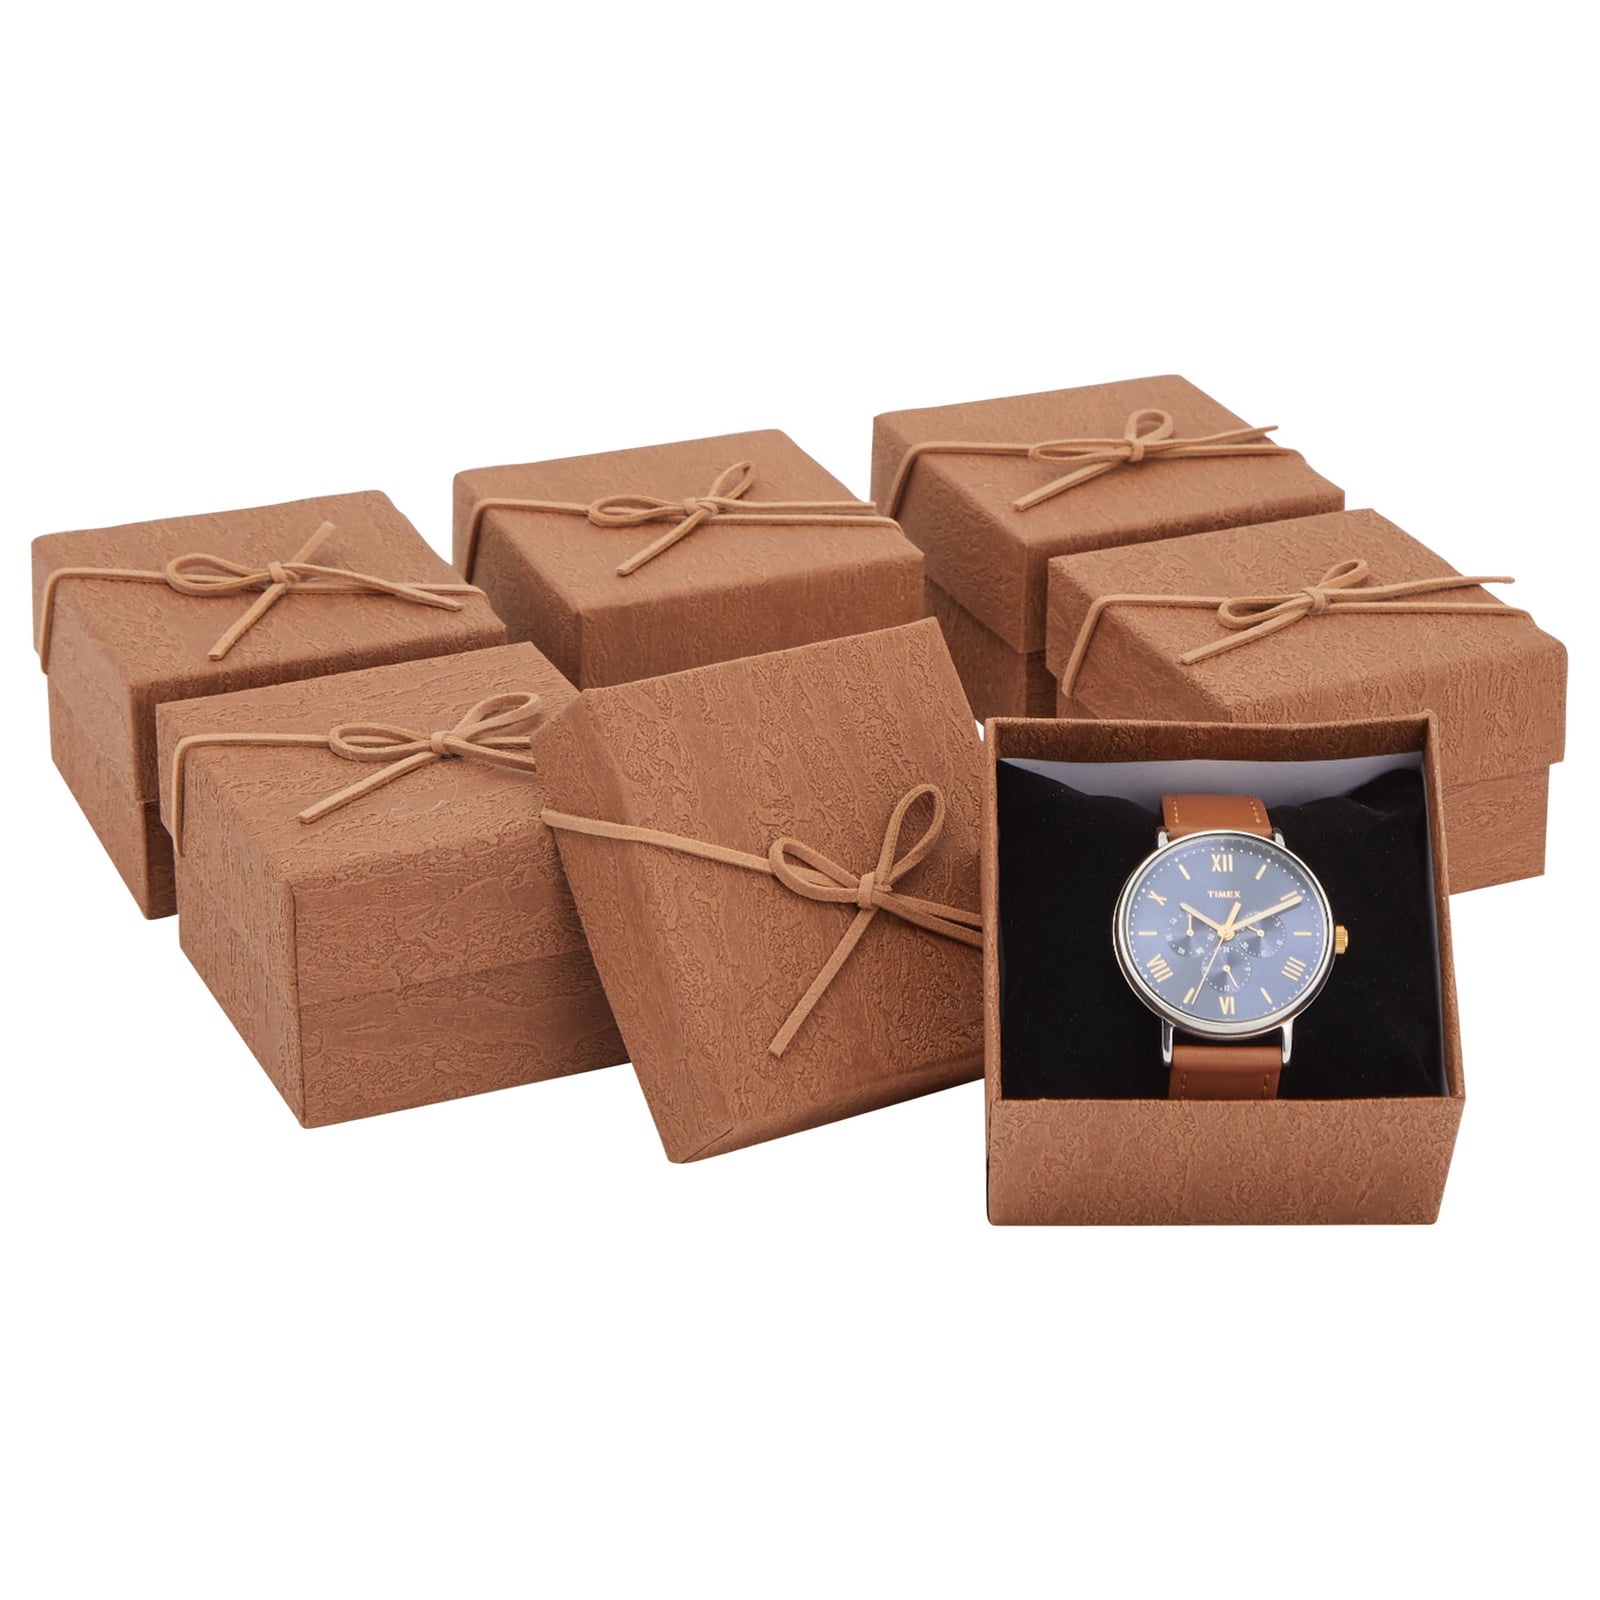 12-48 JEWELLERY GIFT BOXES FOR NECKLACE EARRINGS BRACELET GIFT SET 